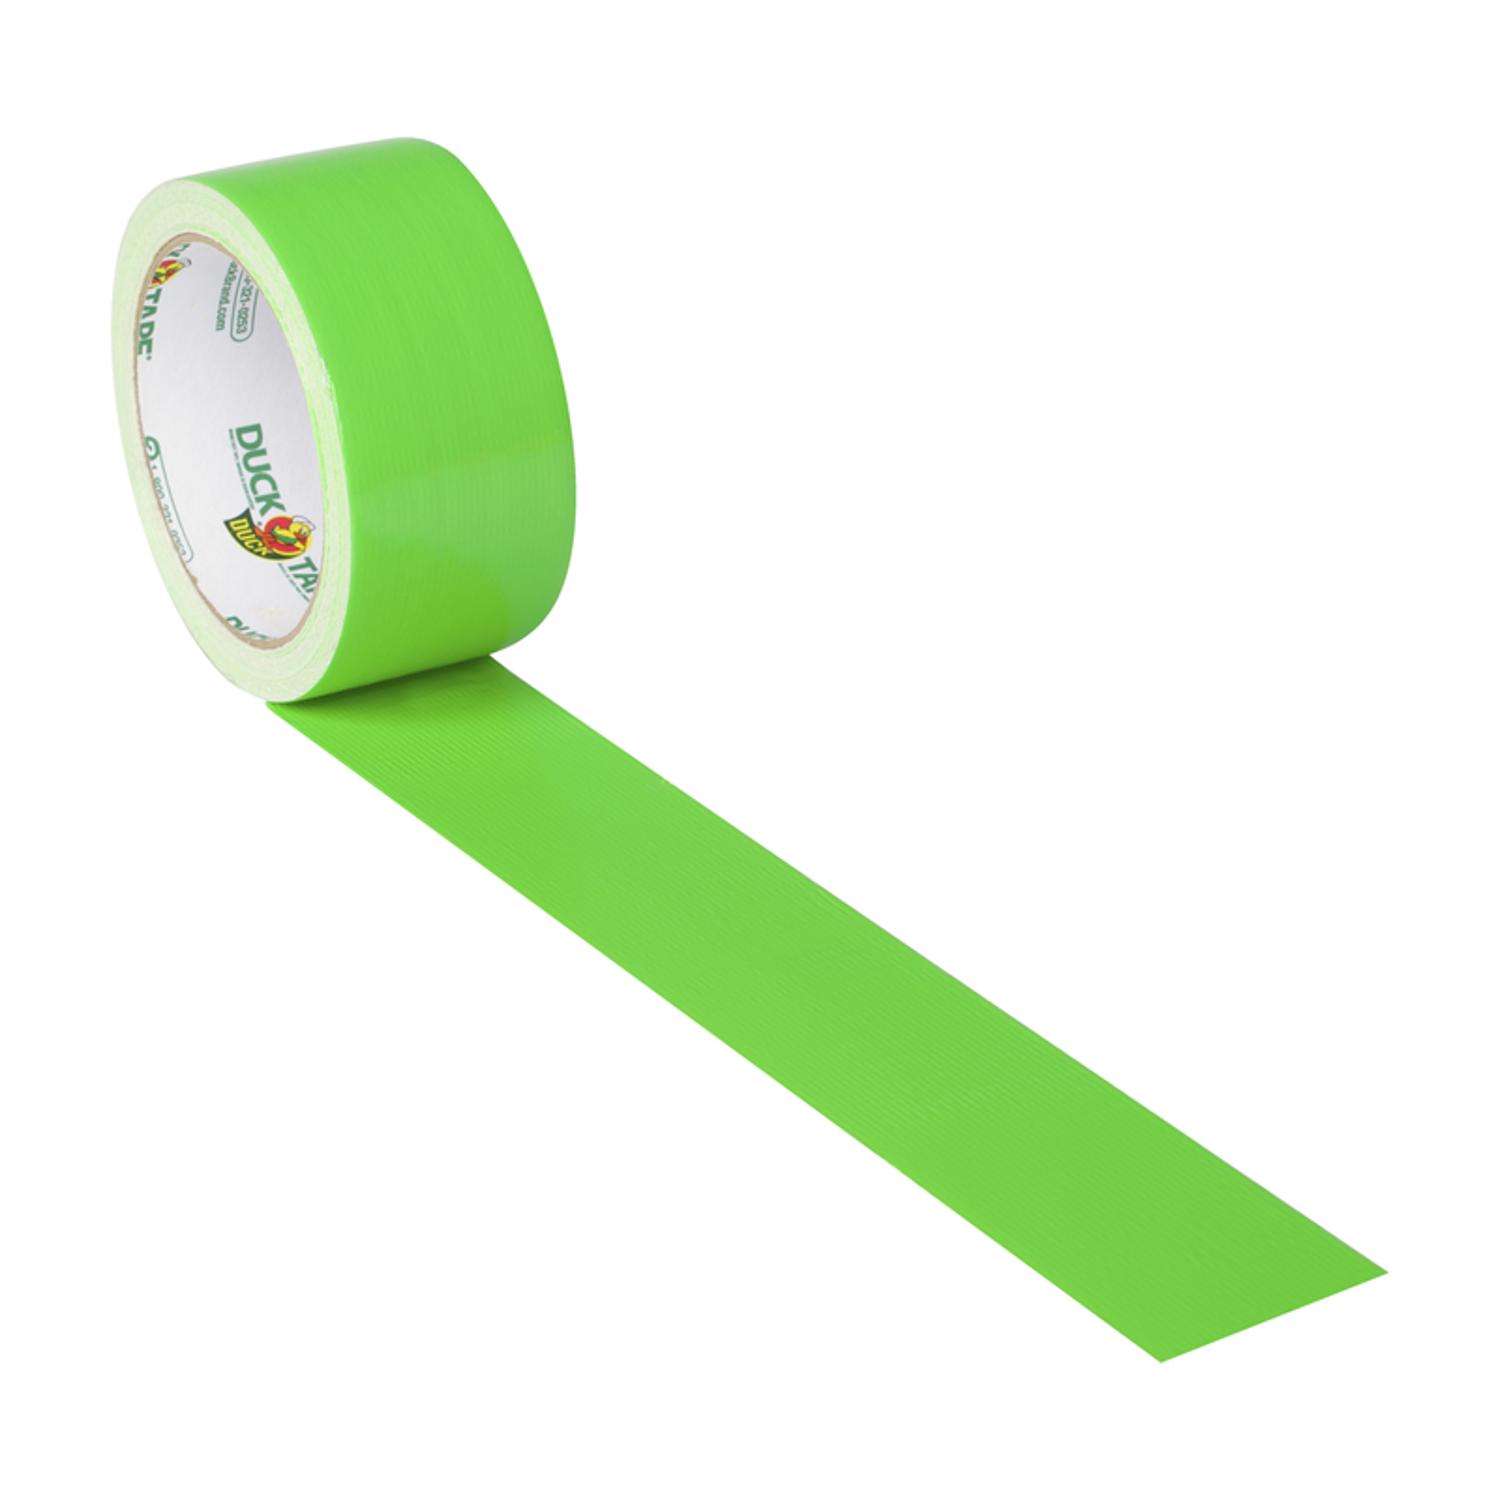 2 X 15 YDS CLEAR DUCT TAPE